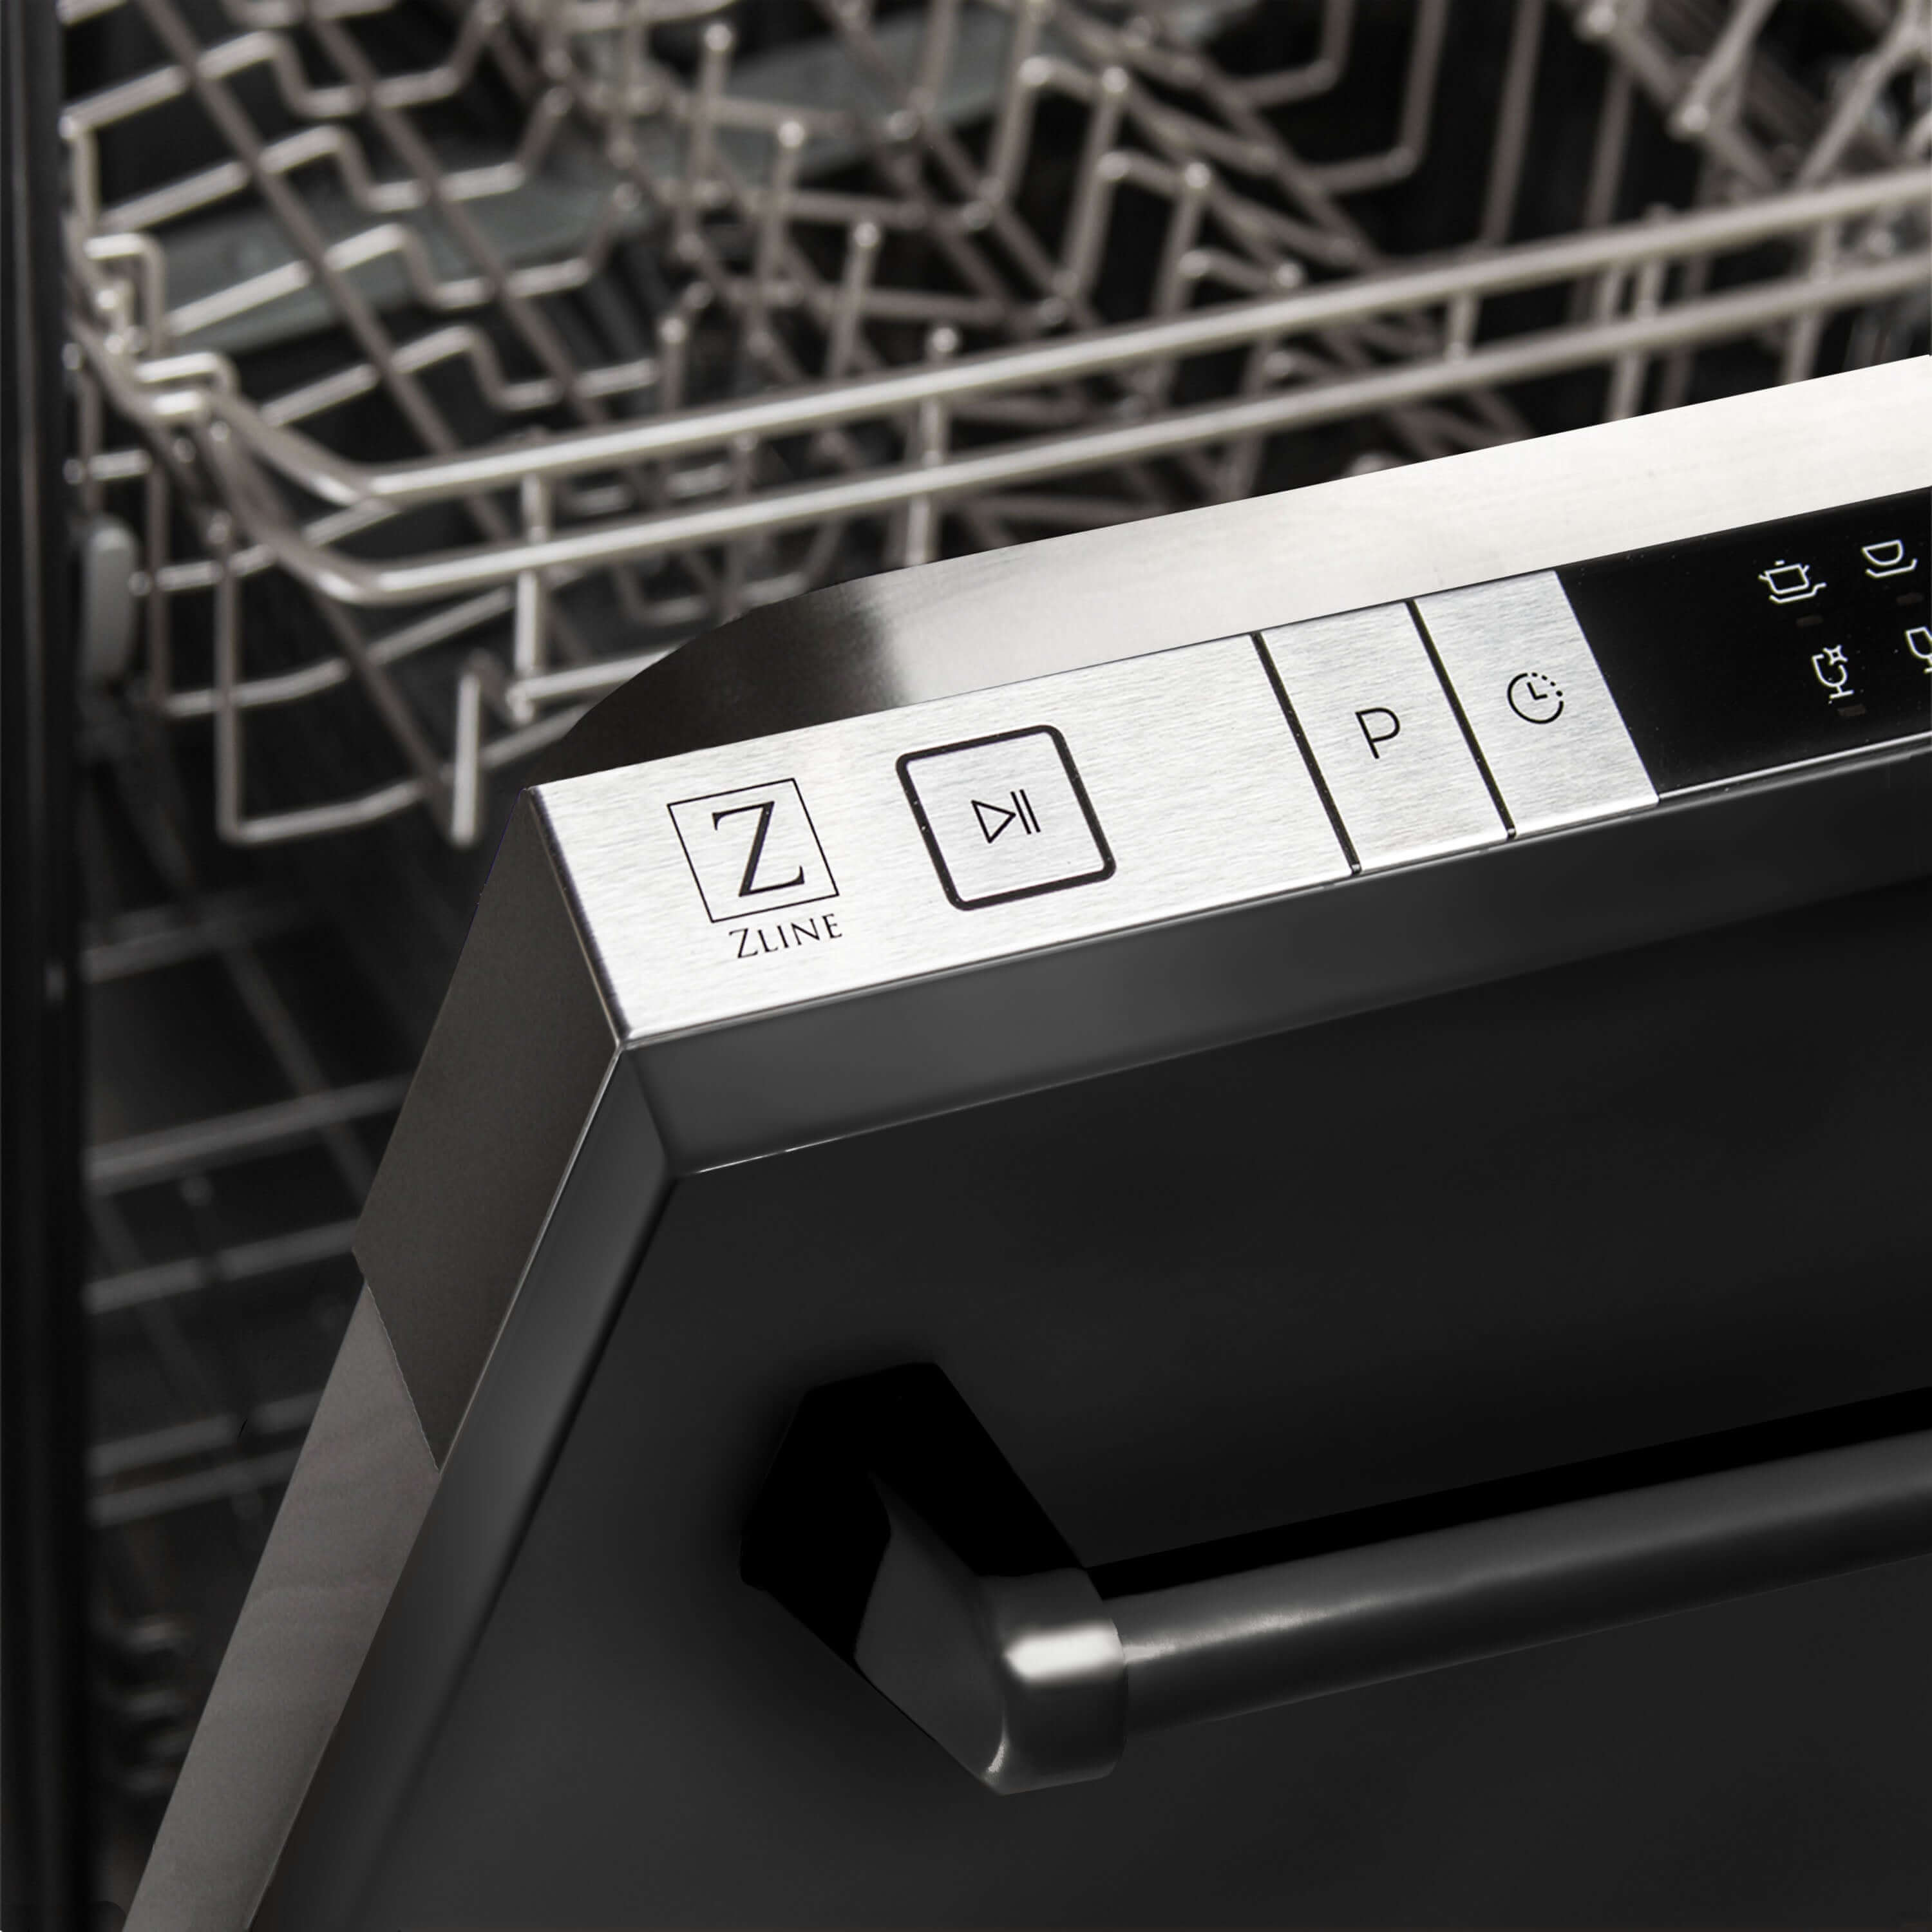 ZLINE 18 in. Compact Top Control Dishwasher with Black Stainless Steel Panel and Traditional Handle, 52dBa (DW-BS-18)